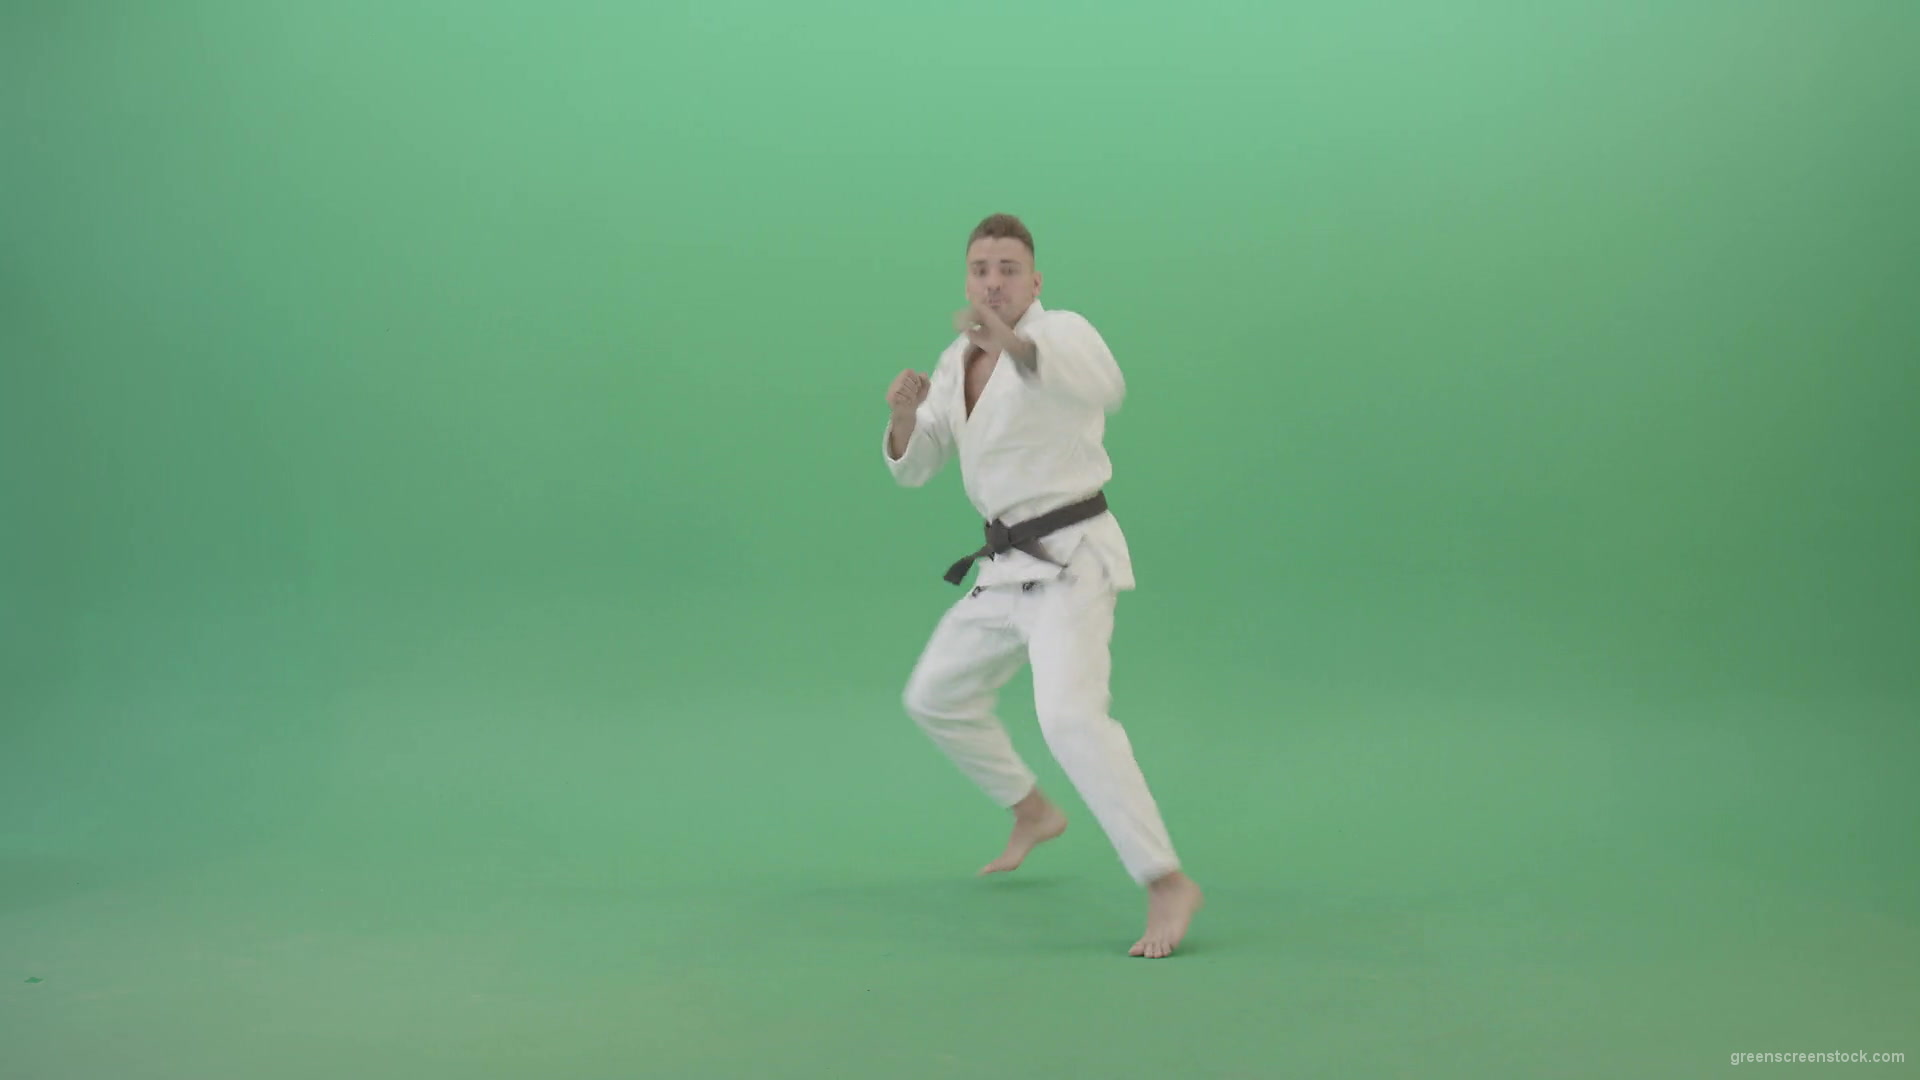 Karate-man-fight-front-vie-kick-punch-isolated-on-green-screen-4K-Video-Footage-1920_004 Green Screen Stock